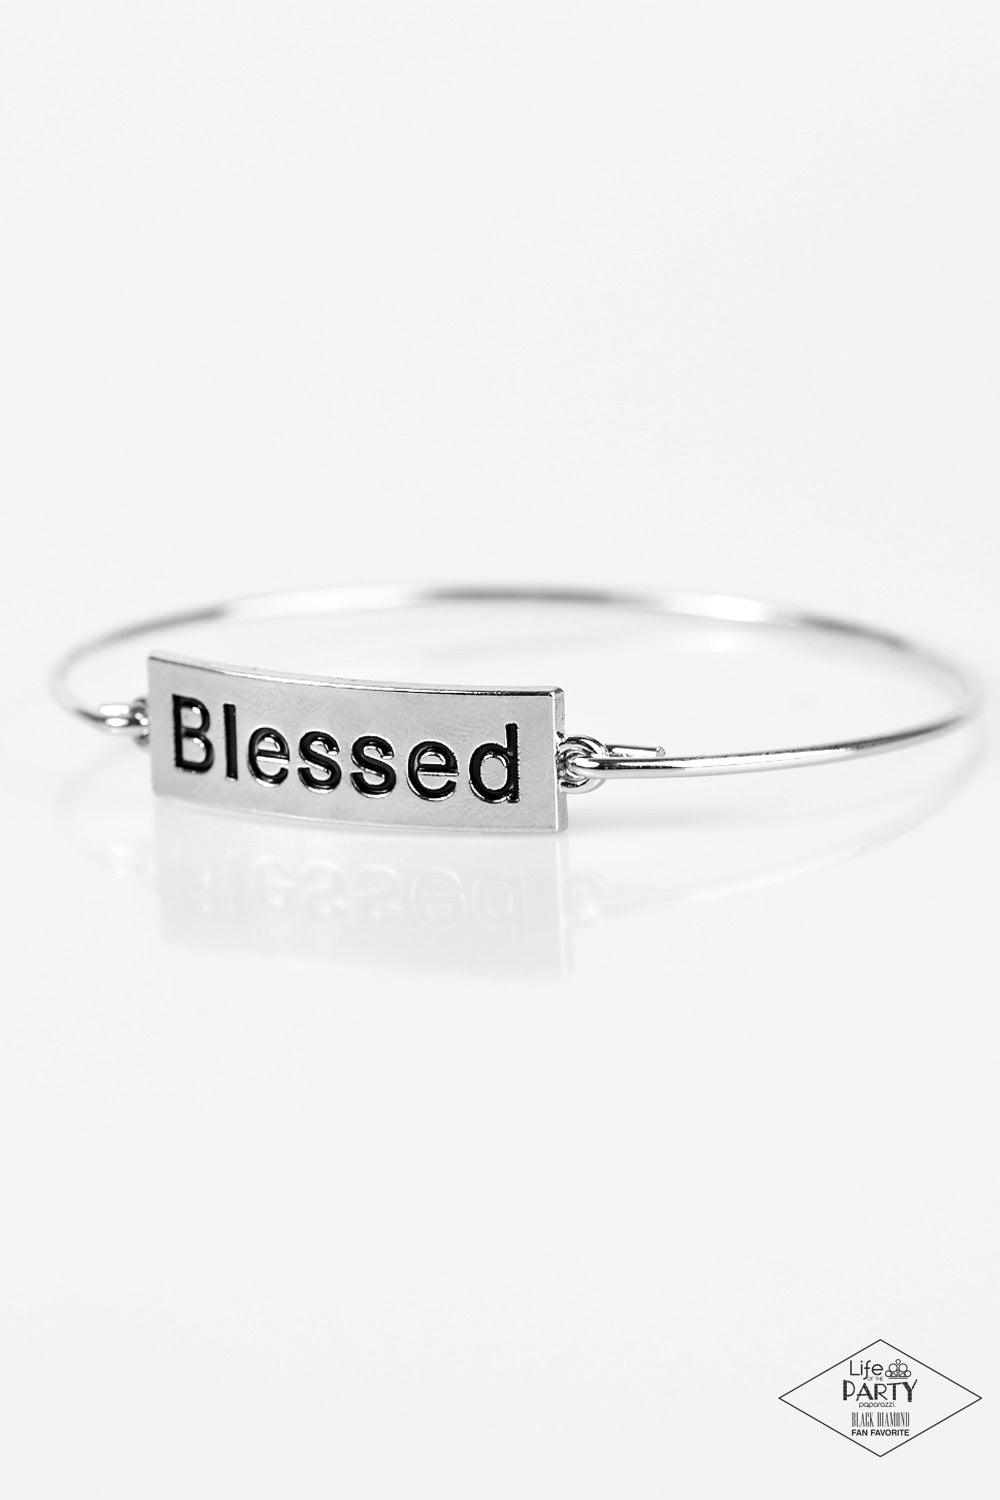 Paparazzi Accessories Blessed - Silver Engraved with the inspiring word "Blessed", a shimmery silver plate attaches to a skinny silver bar, creating a dainty bangle. Jewelry